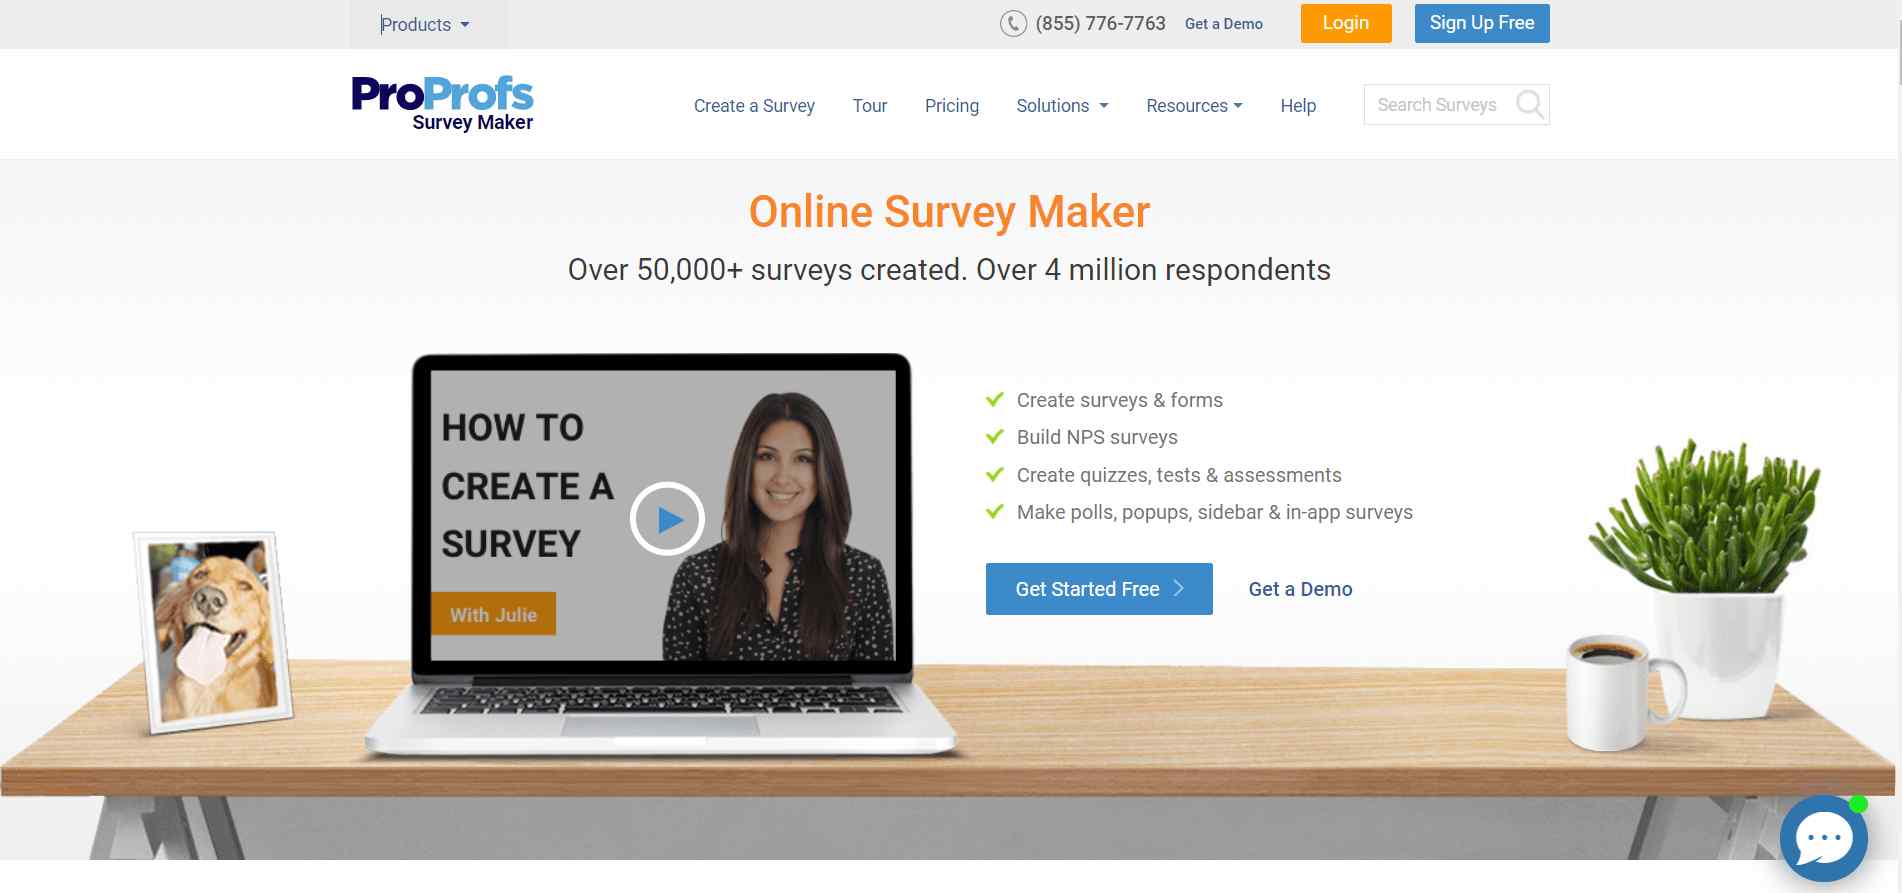 ProProfs Survey Maker one of the best product feedback tools